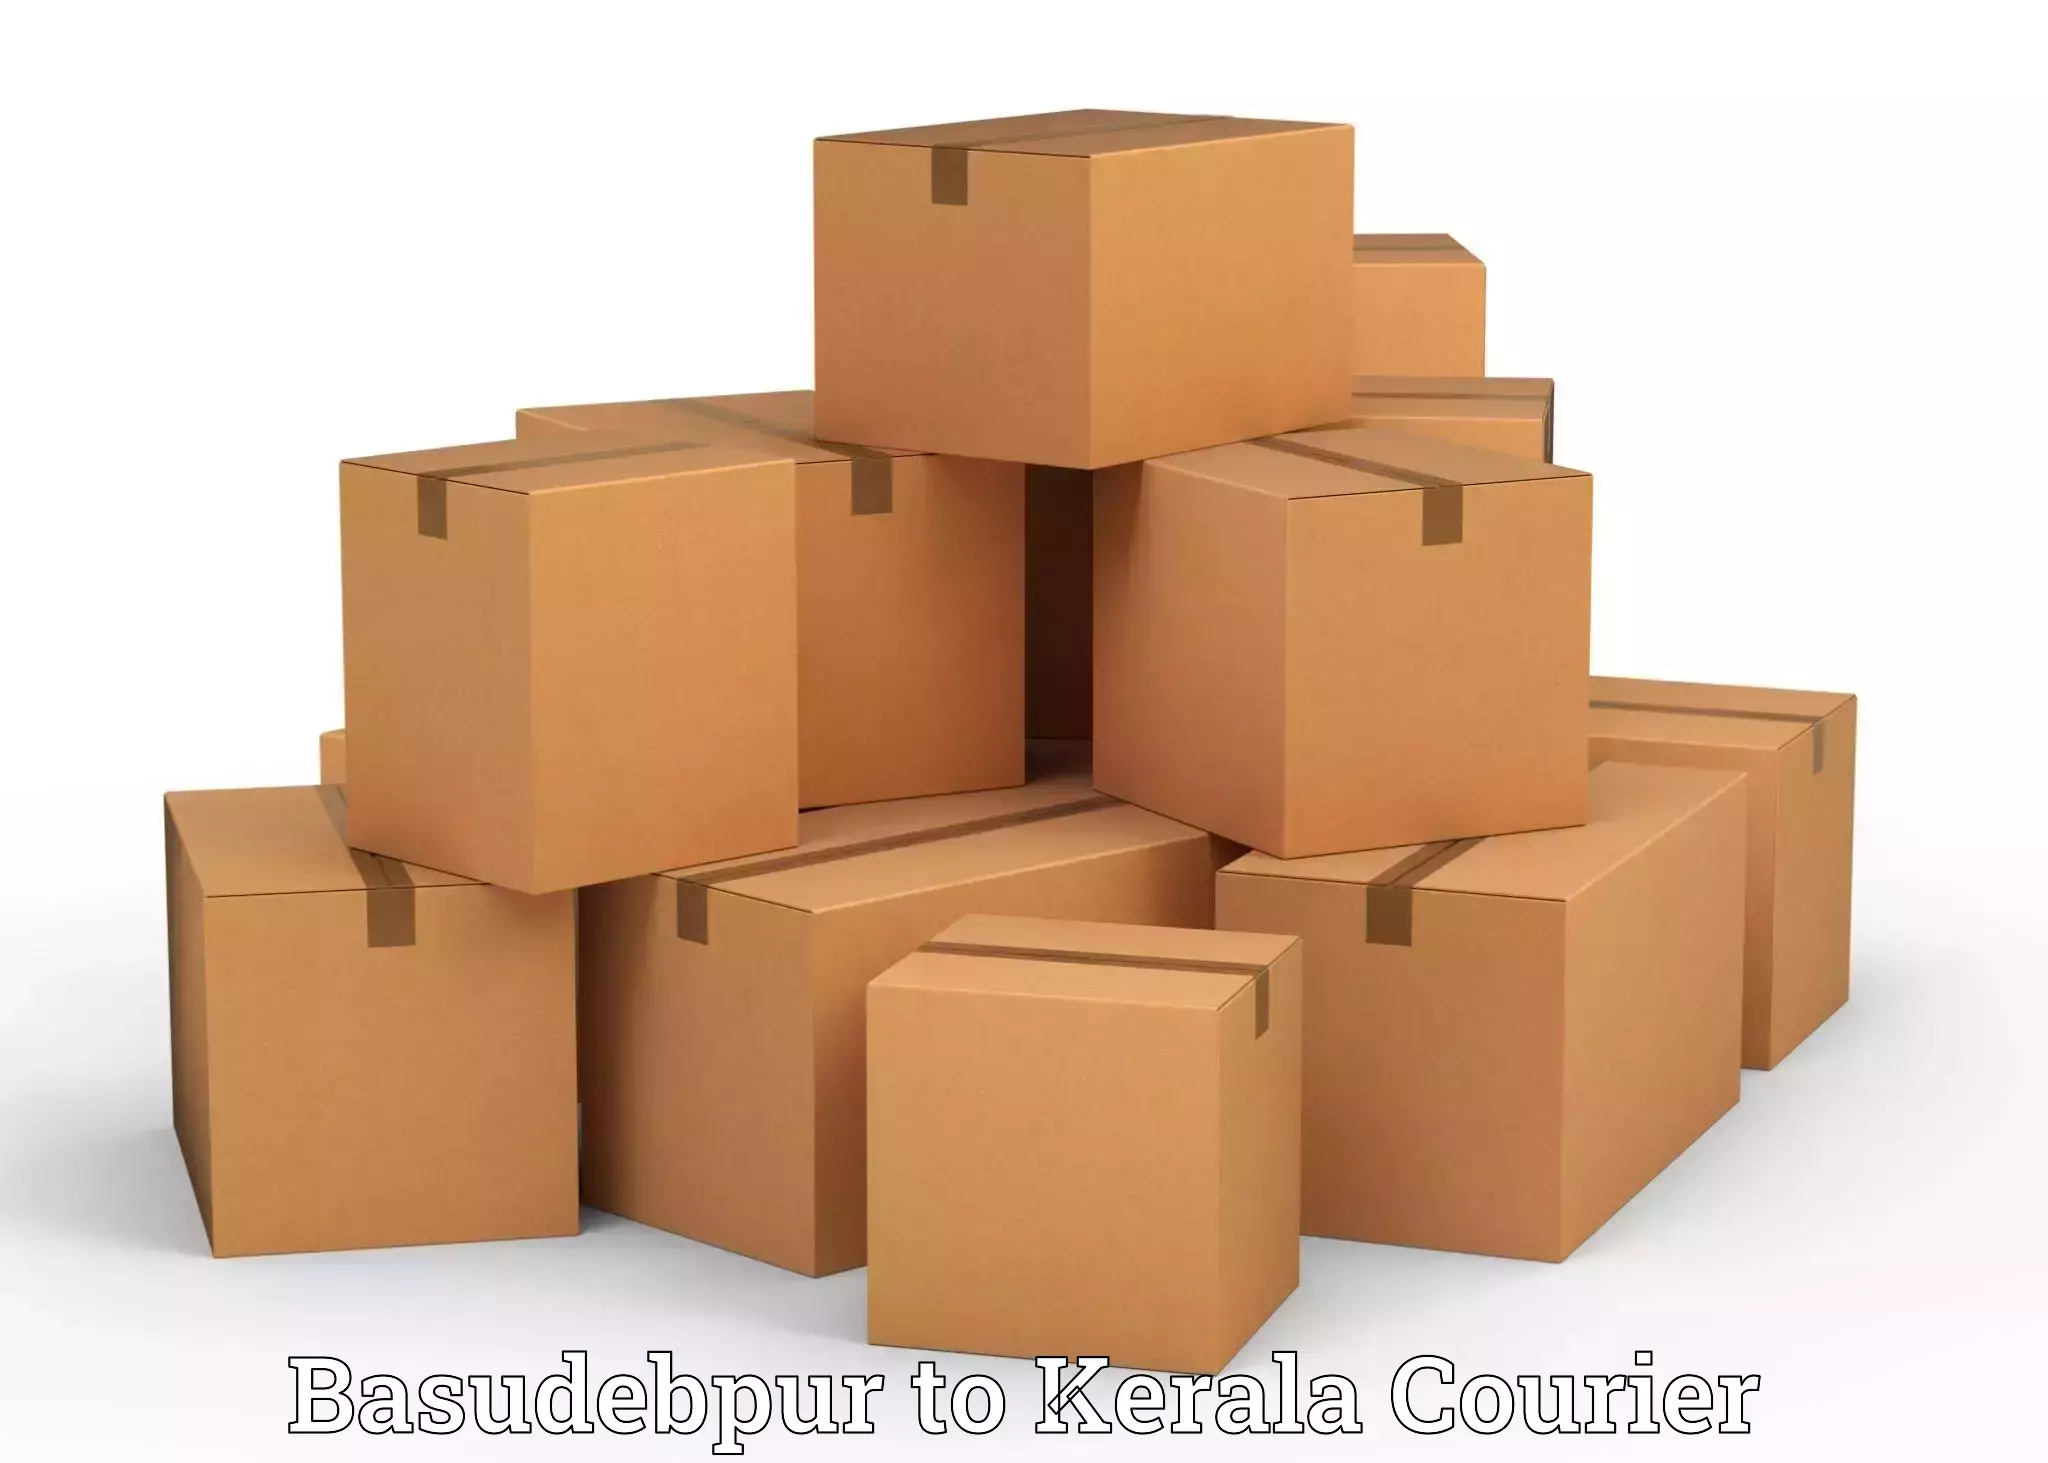 Household moving experts Basudebpur to Cochin University of Science and Technology